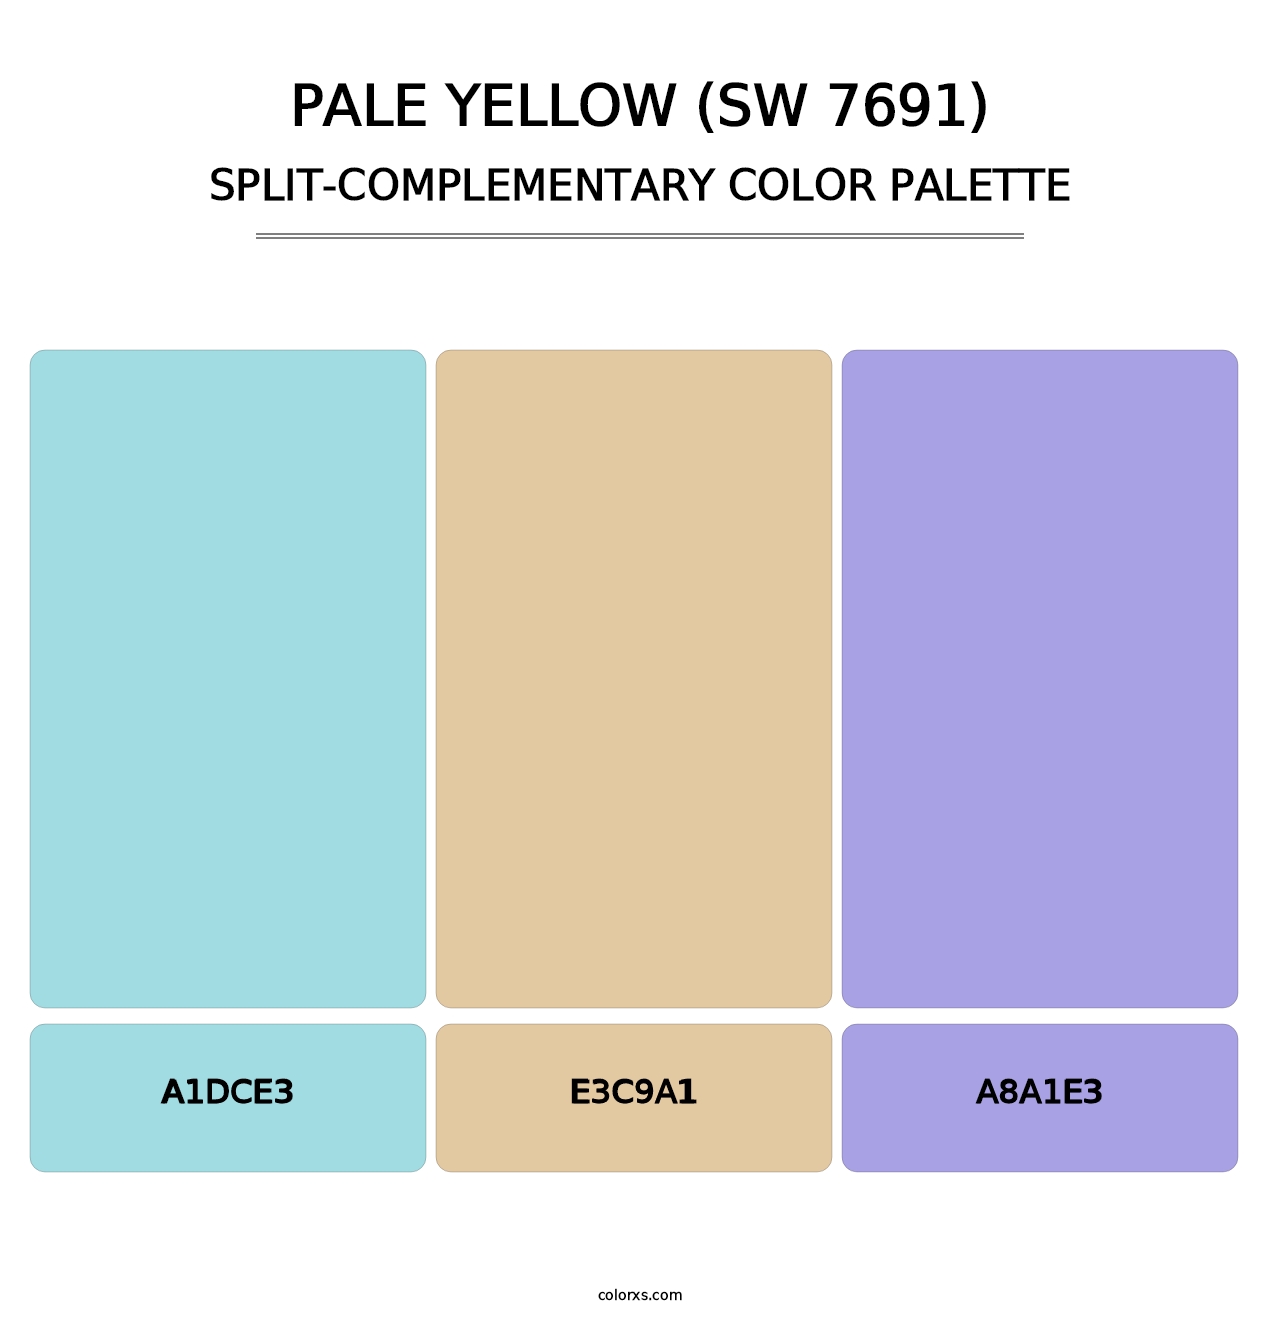 Pale Yellow (SW 7691) - Split-Complementary Color Palette